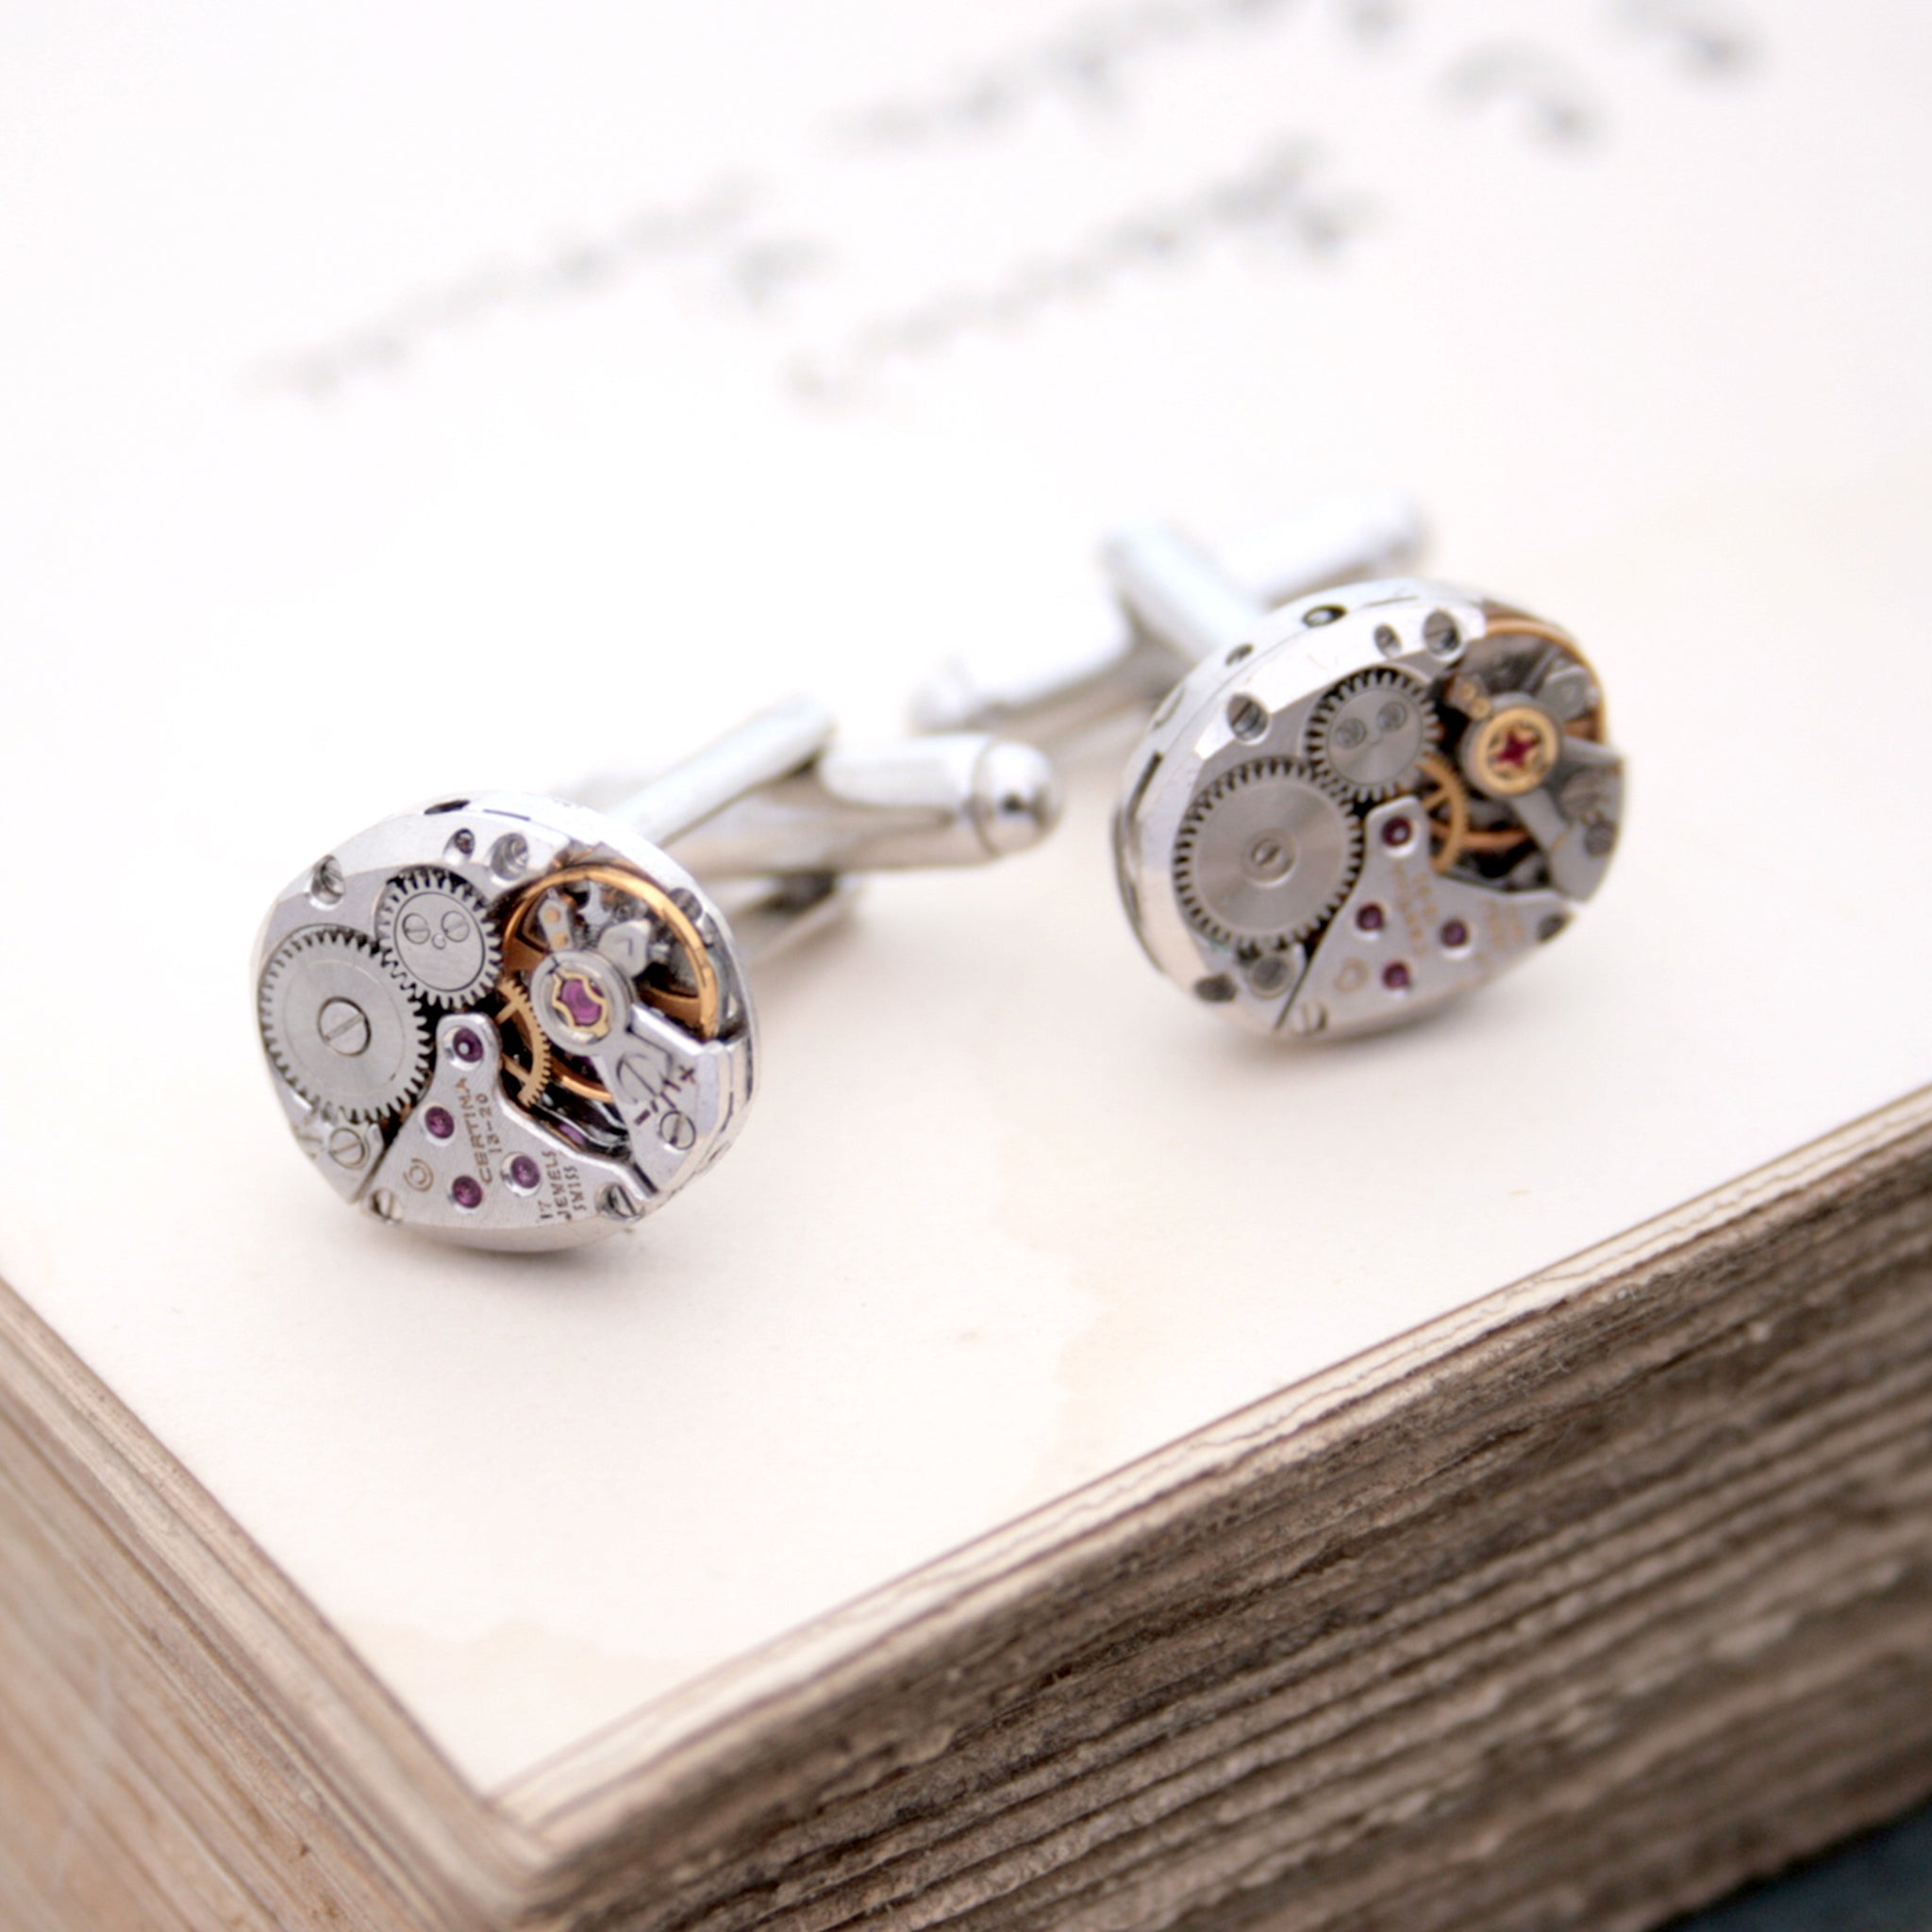 Deluxe Steampunk Cufflinks made of real watch movements on sterling backs